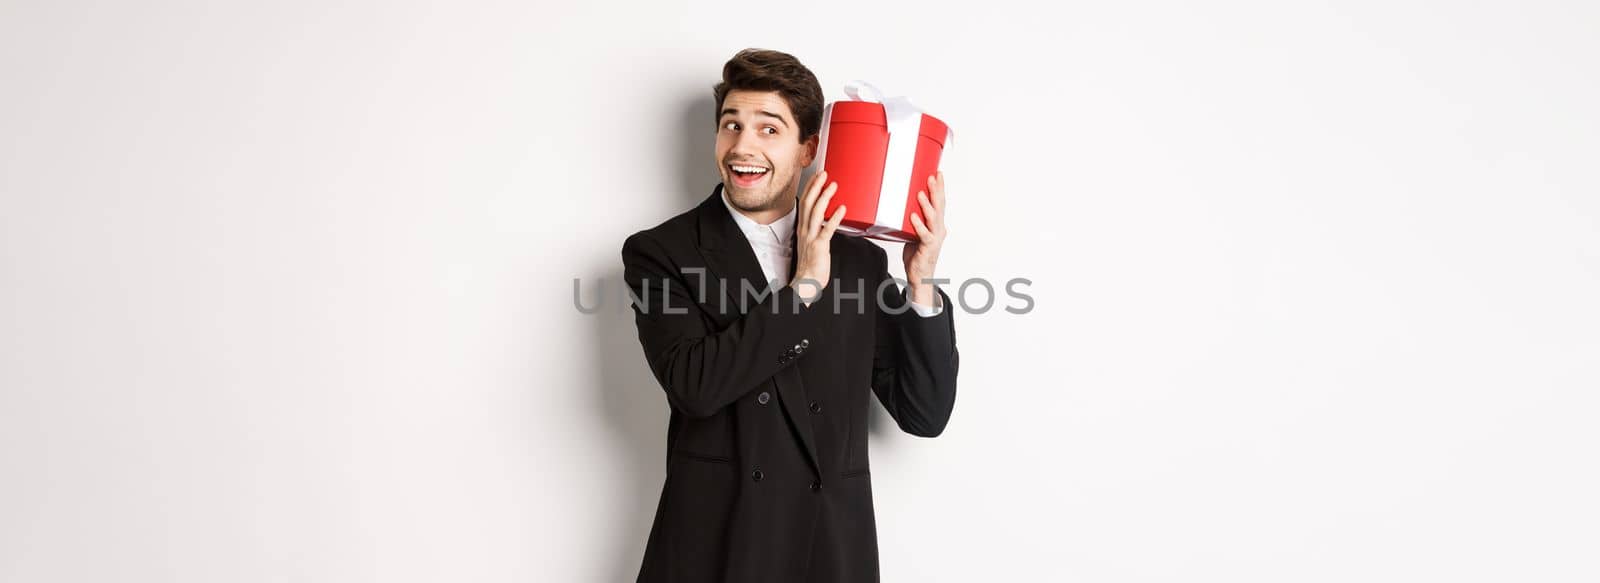 Concept of christmas holidays, celebration and lifestyle. Handsome man in black suit, shaking a box with gift, wondering whats inside, standing against white background.